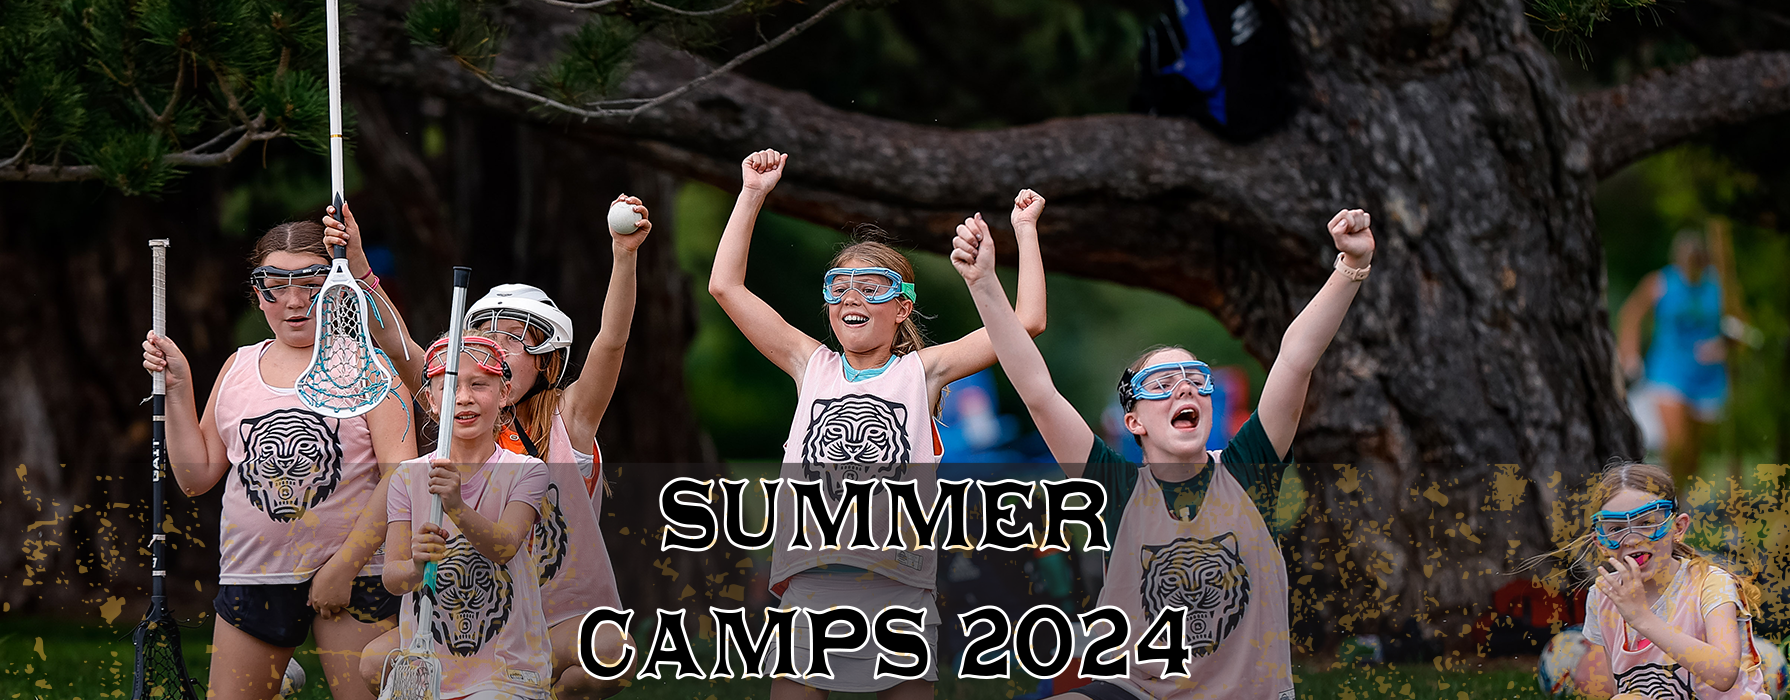 Camps 2024 Promo 5.png